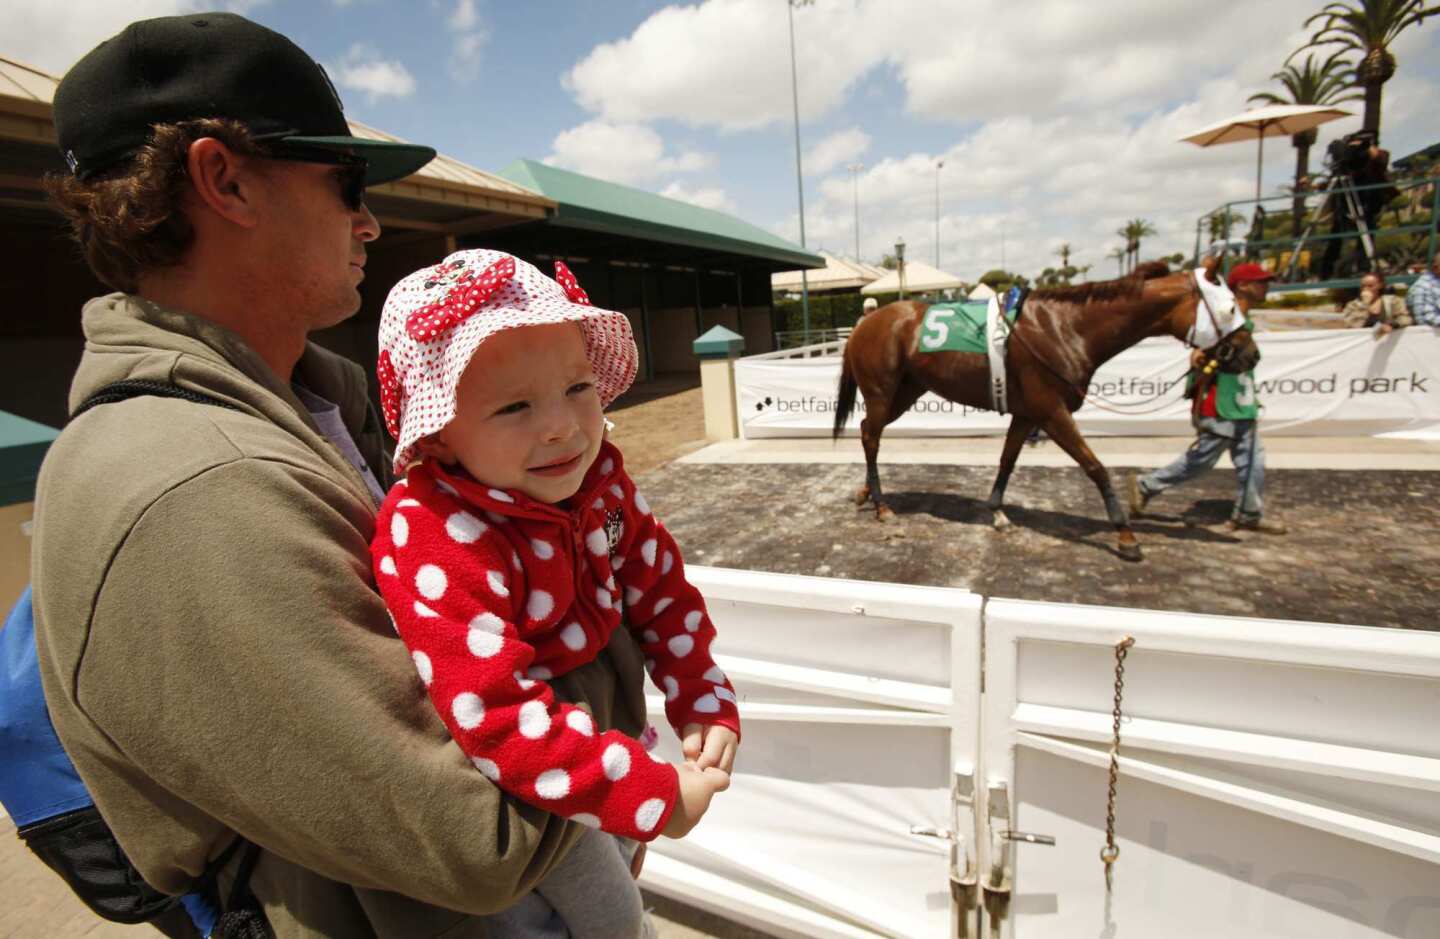 Bobby Summers of El Segundo brings his nearly 2-year-old daughter to watch the horses on opening day at Betfair Hollywood Park on Thursday.